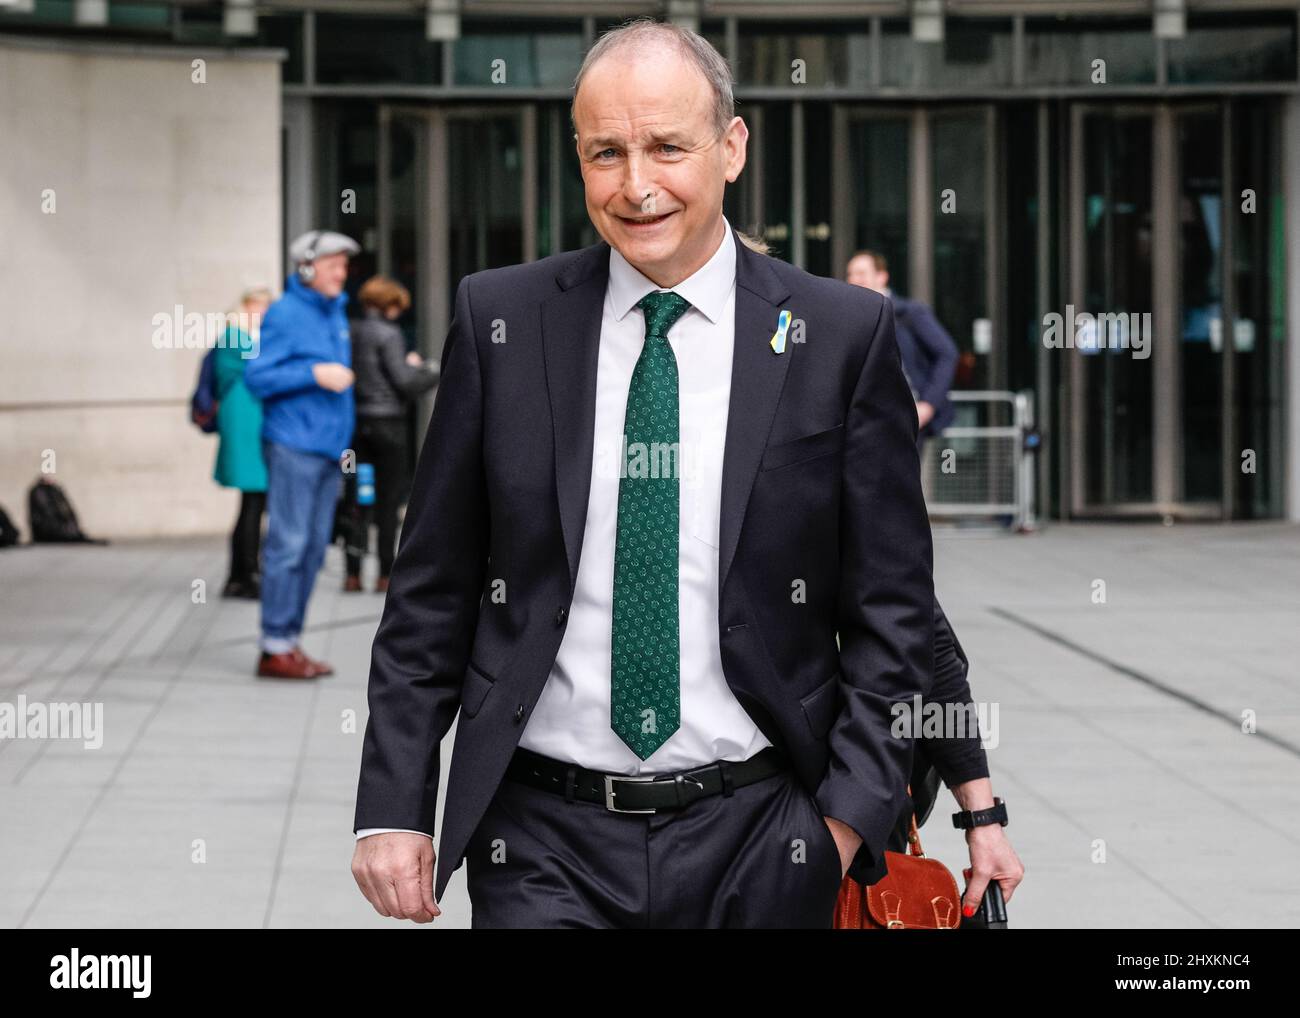 London, UK. 13th Mar, 2022. Micheál Martin, Irish Taoiseach (Prime Minister) at the BBC for an interview. Credit: Imageplotter/Alamy Live News Stock Photo